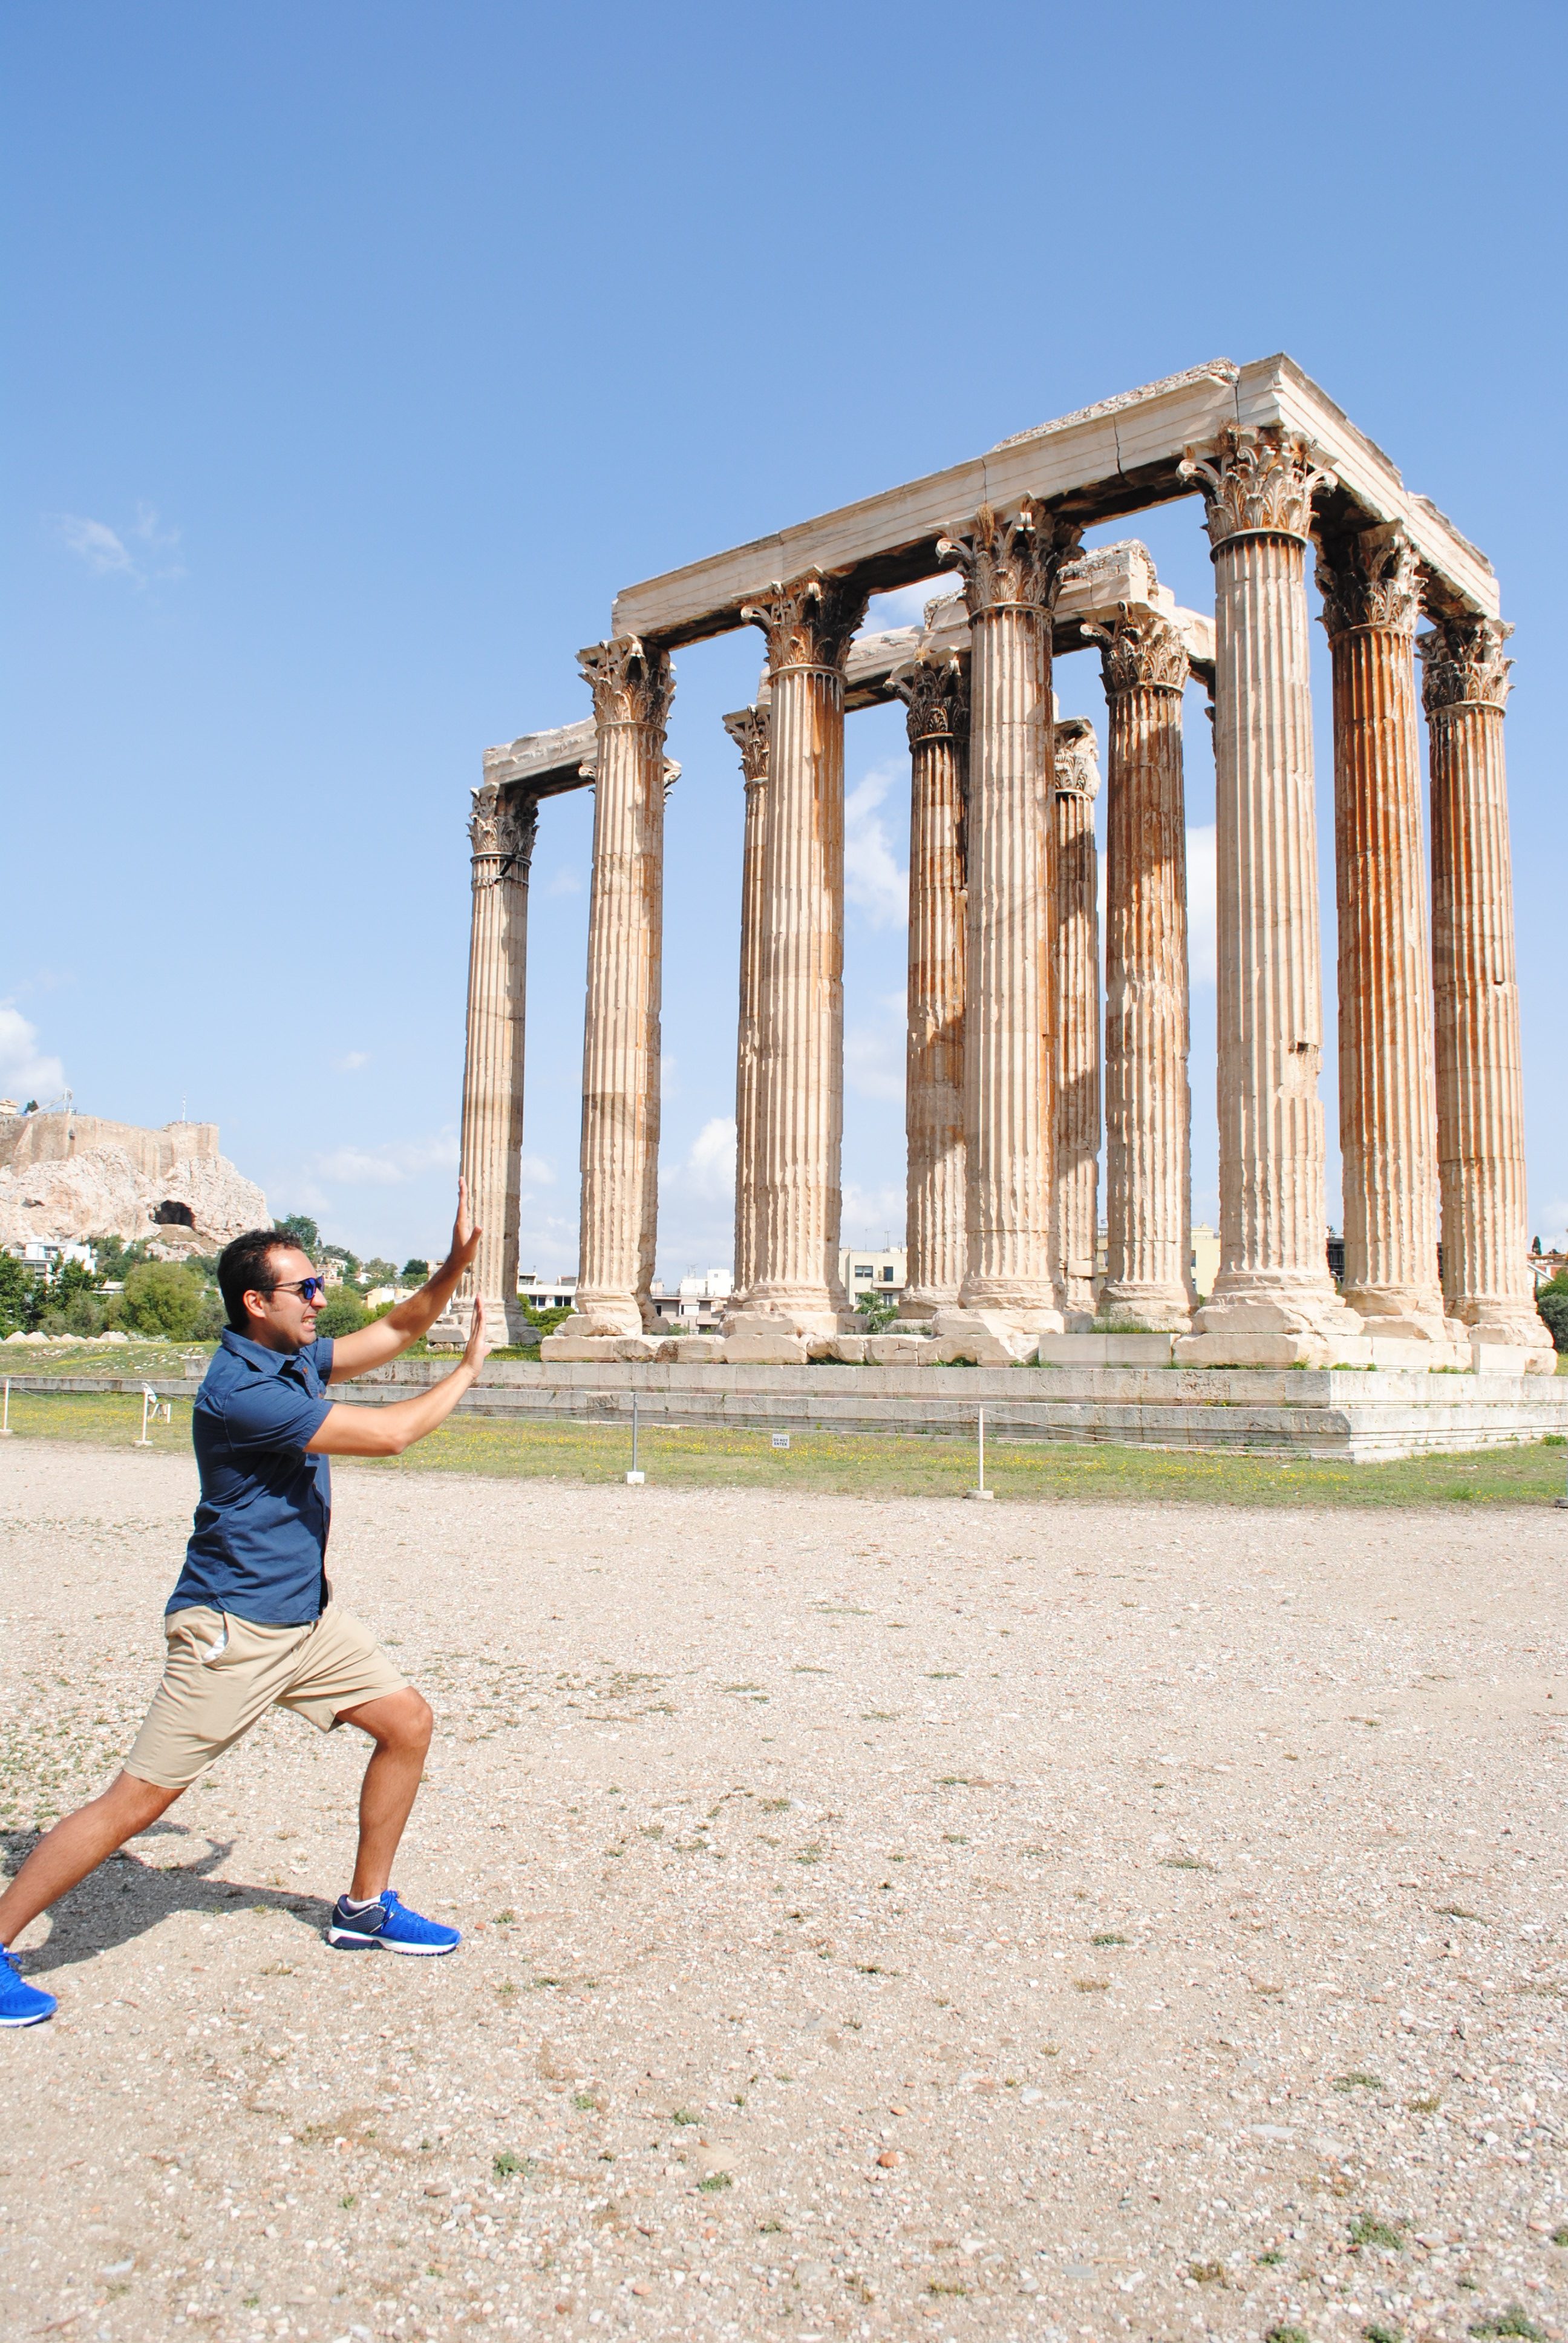 Having some fun at the Temple of Olympian Zeus